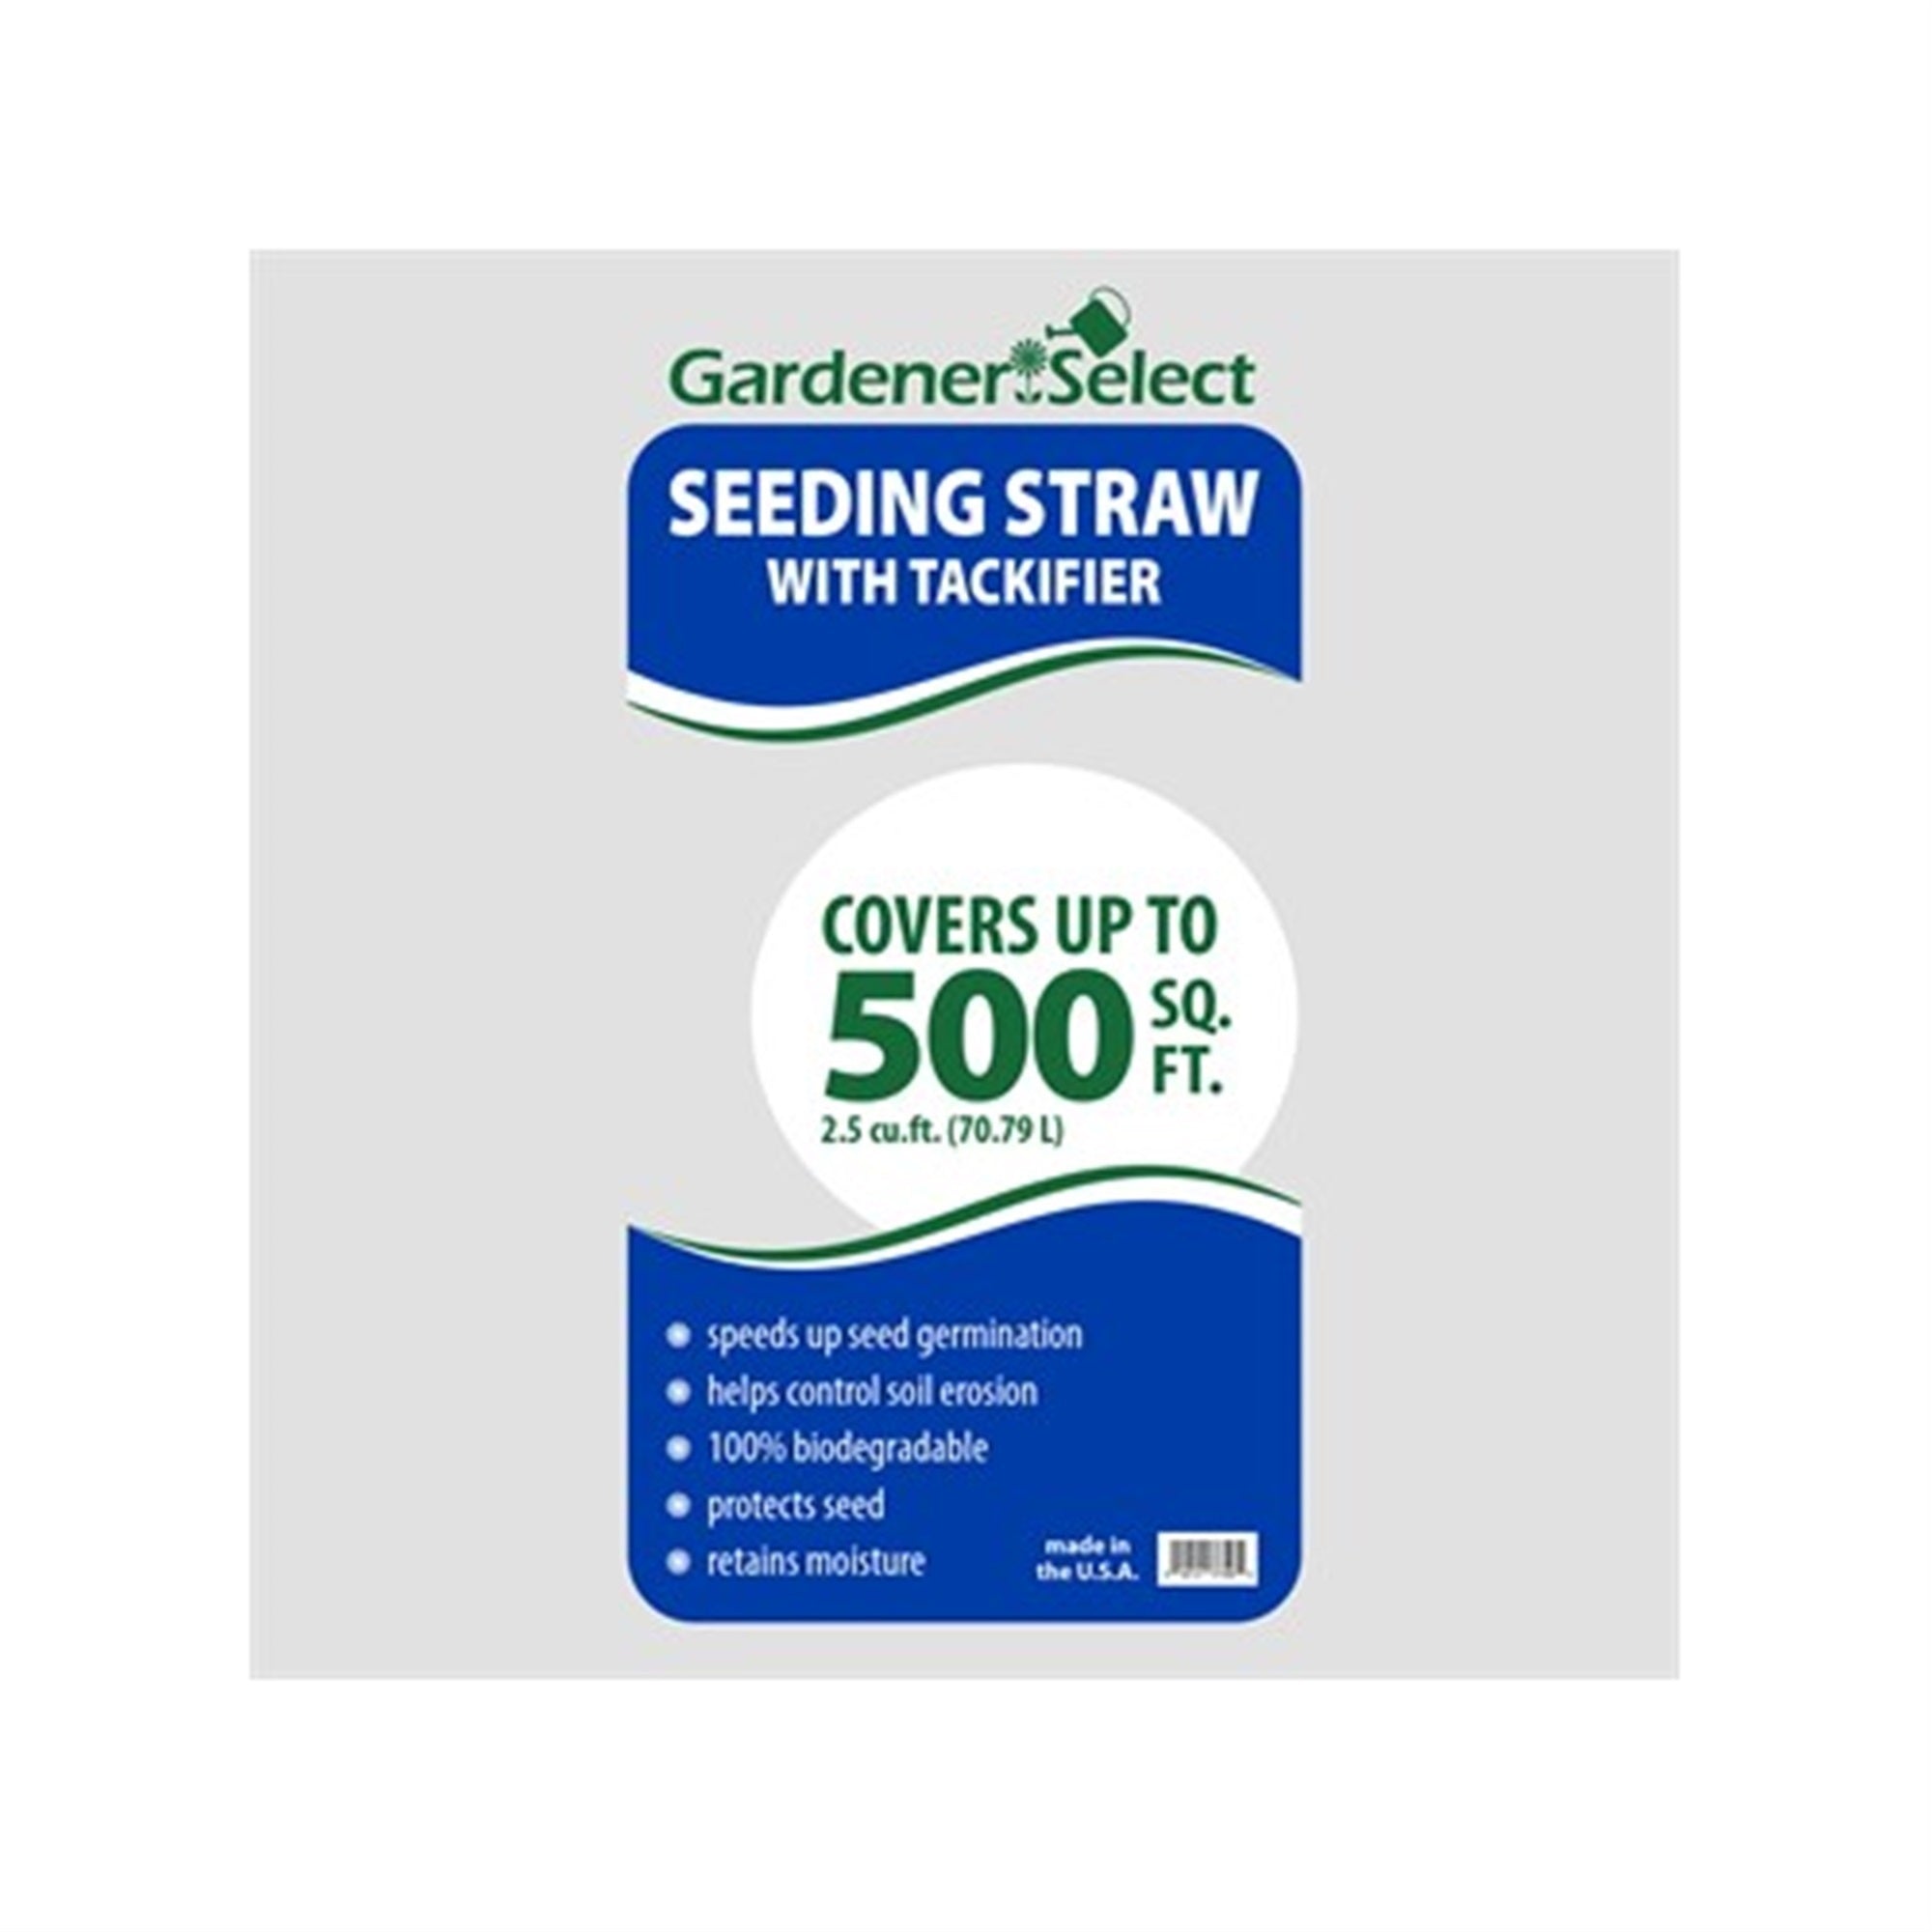 Gardener Select Seeding Straw with Tackifier, 2.5 Cubic Feet